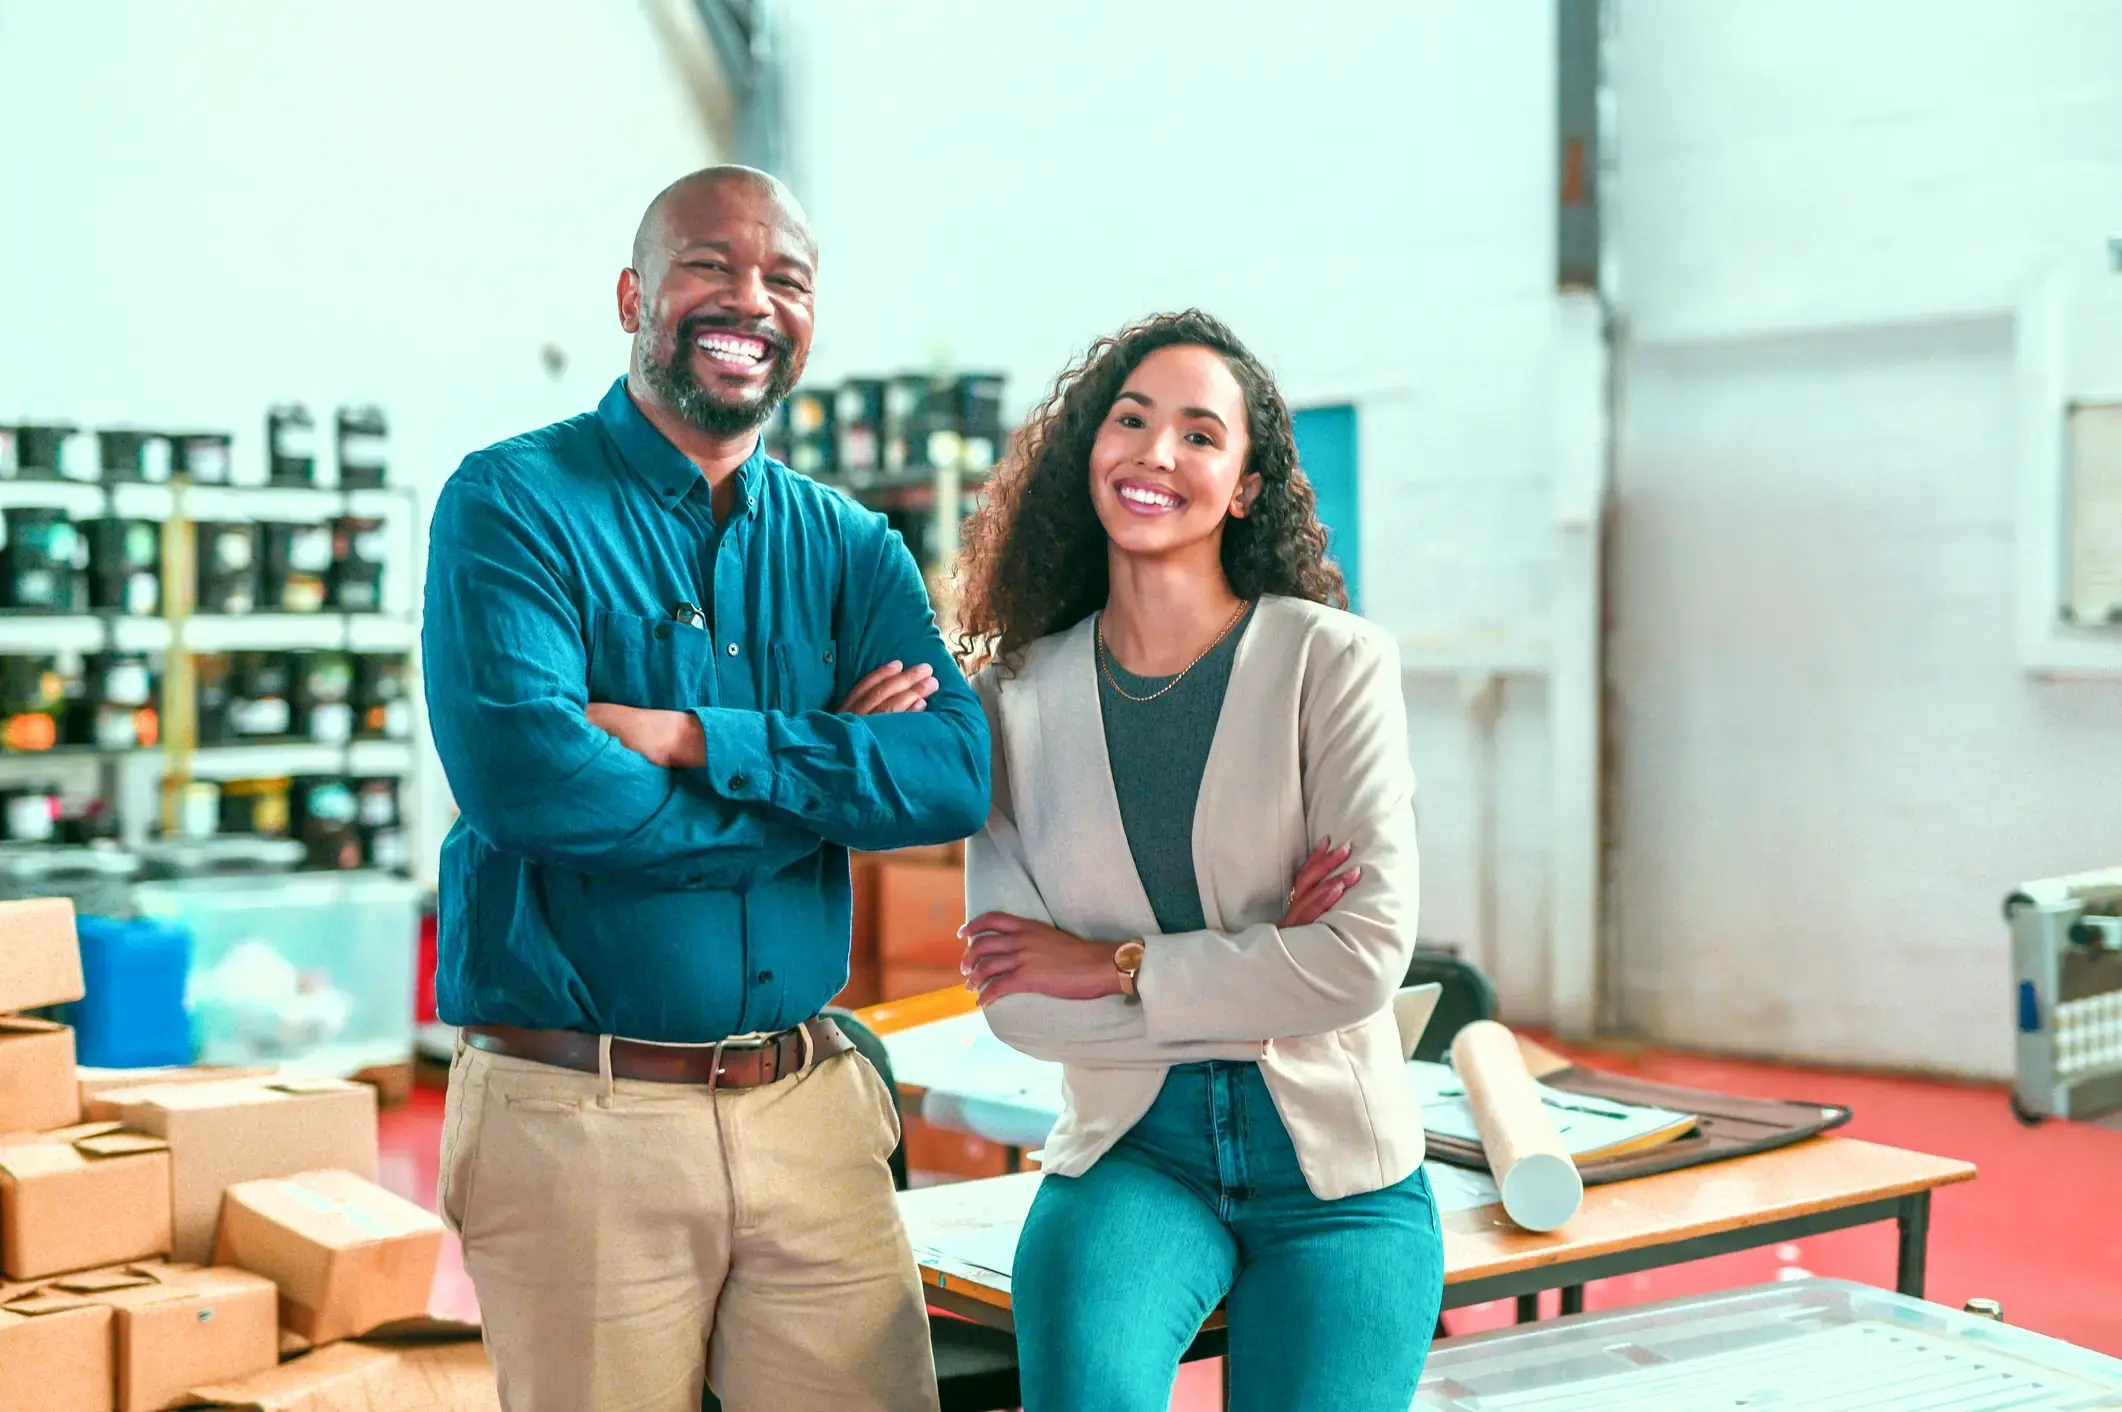 Business partners in a warehouse, smiling with confidence and collaboration.